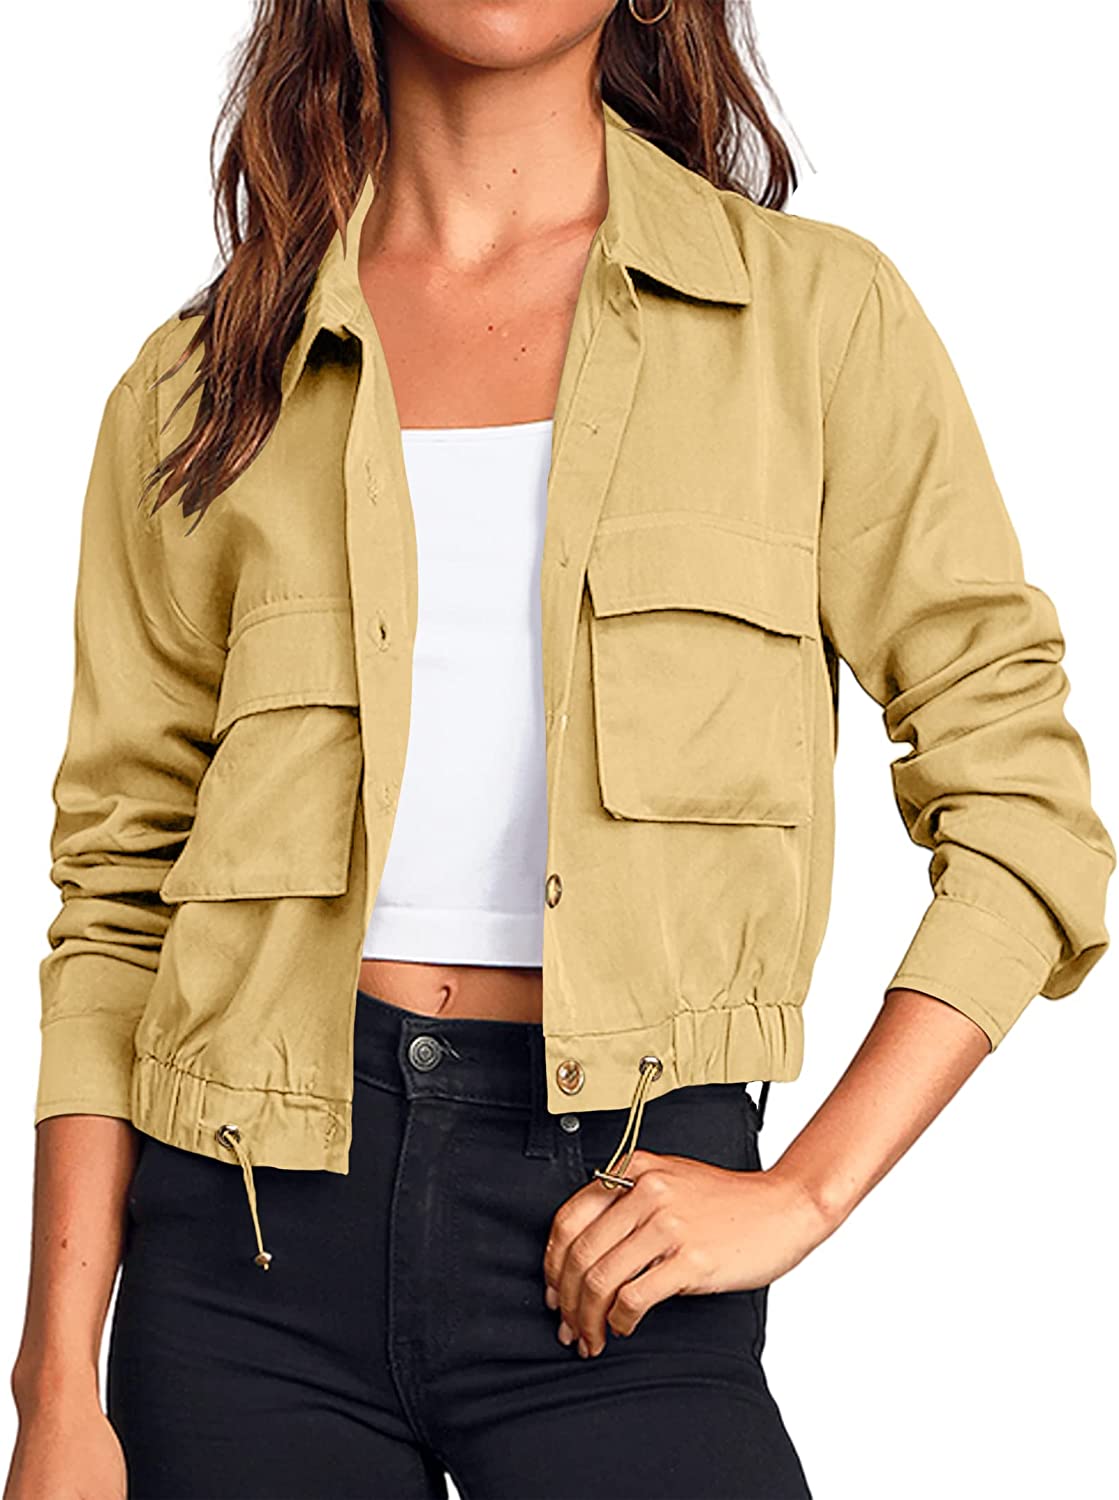 Onedreamer Women's Military Safari Cropped Jackets Button Down Lightweight Oversized Utility Anorak Coat with Pockets